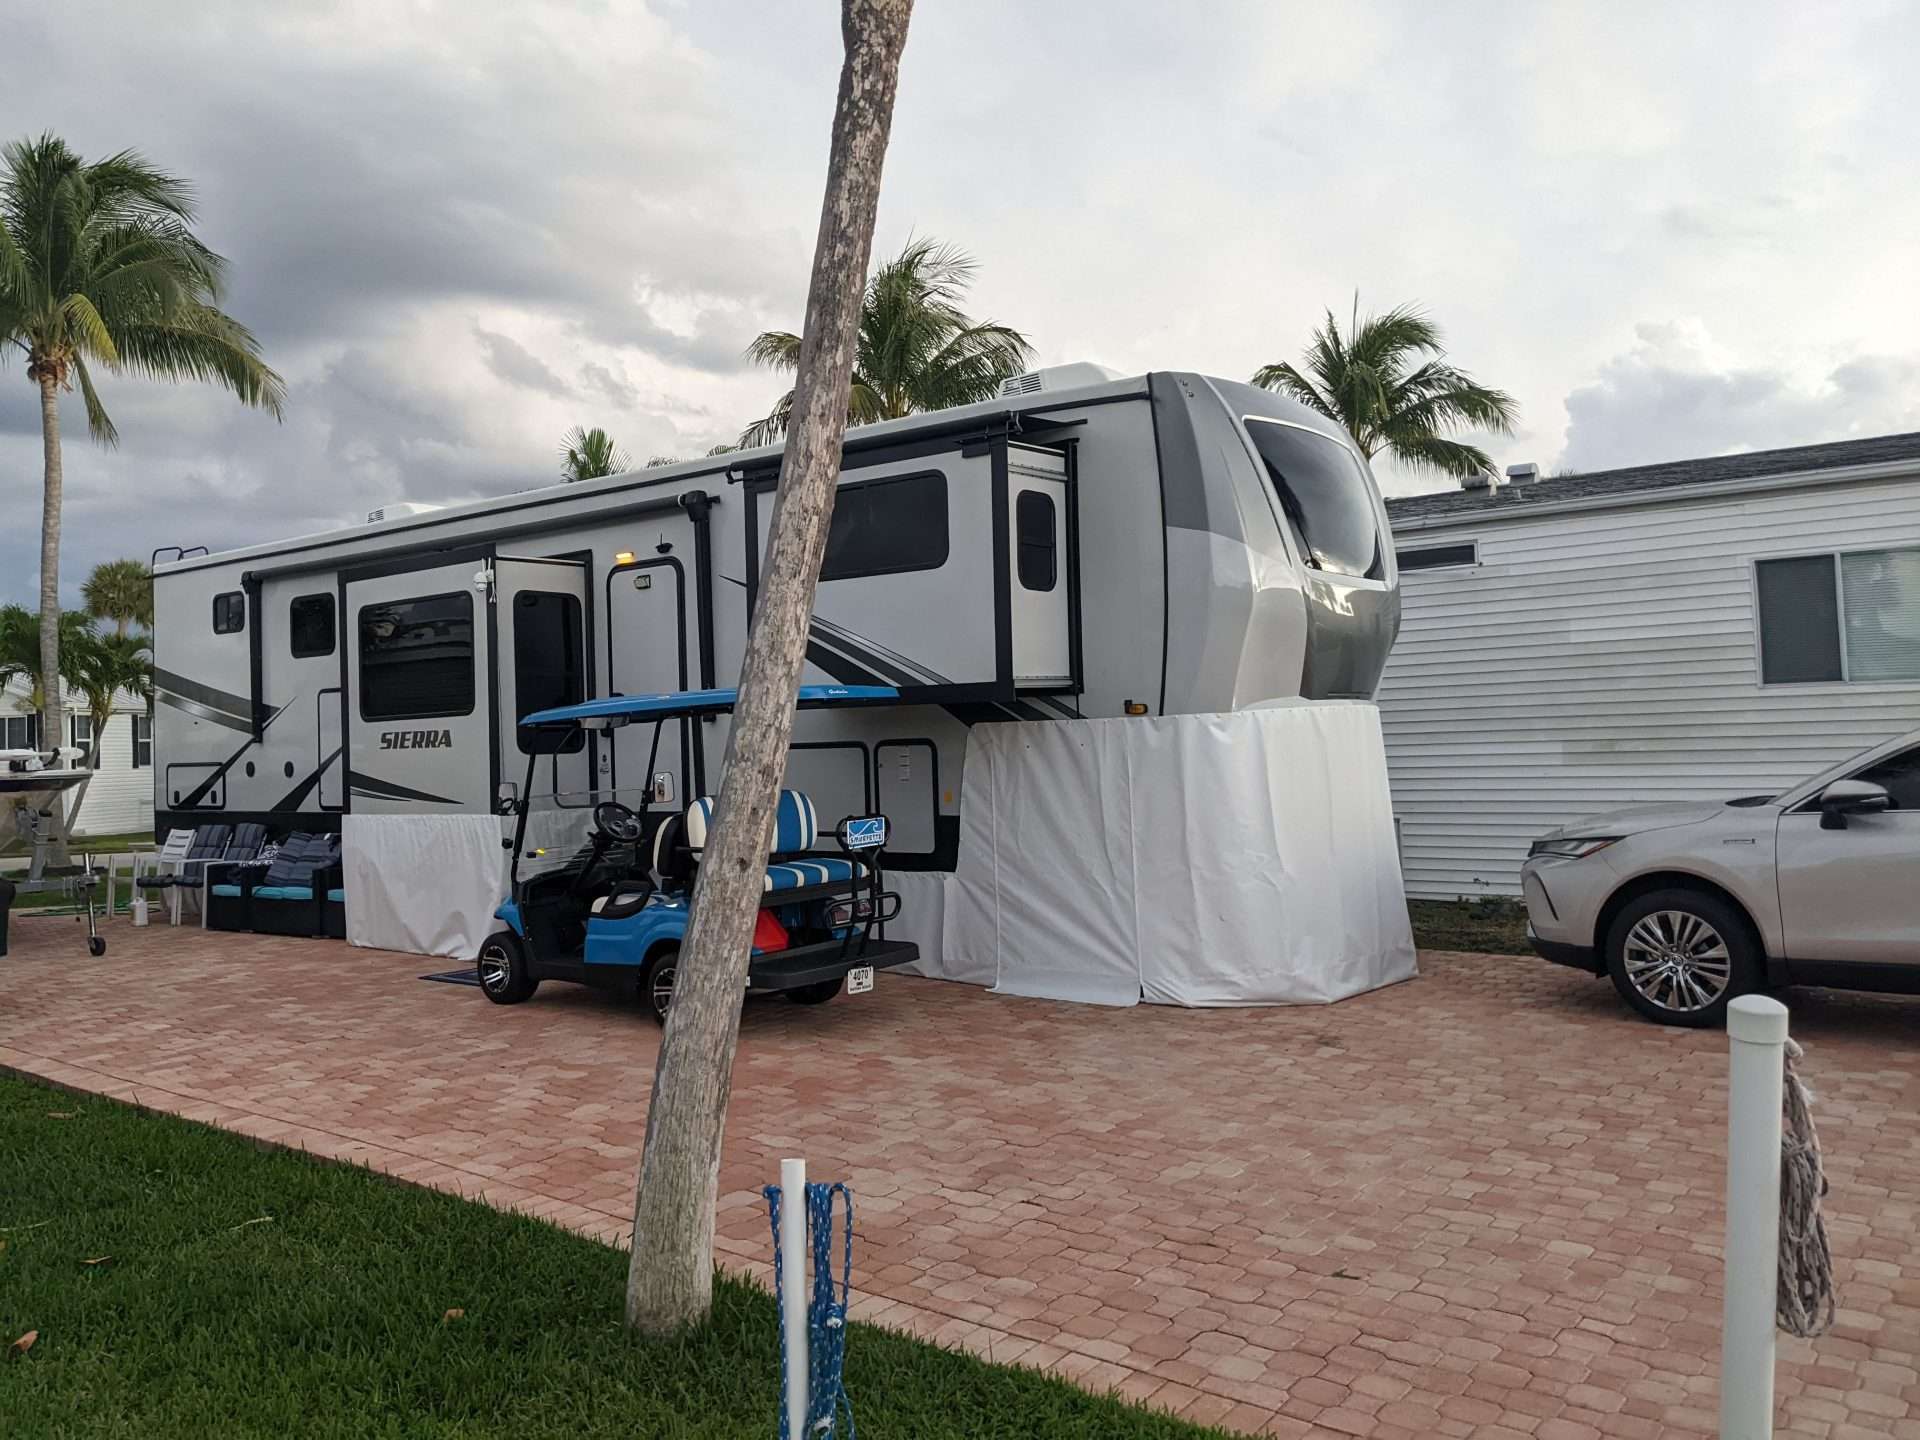 RV skirting in warm weather